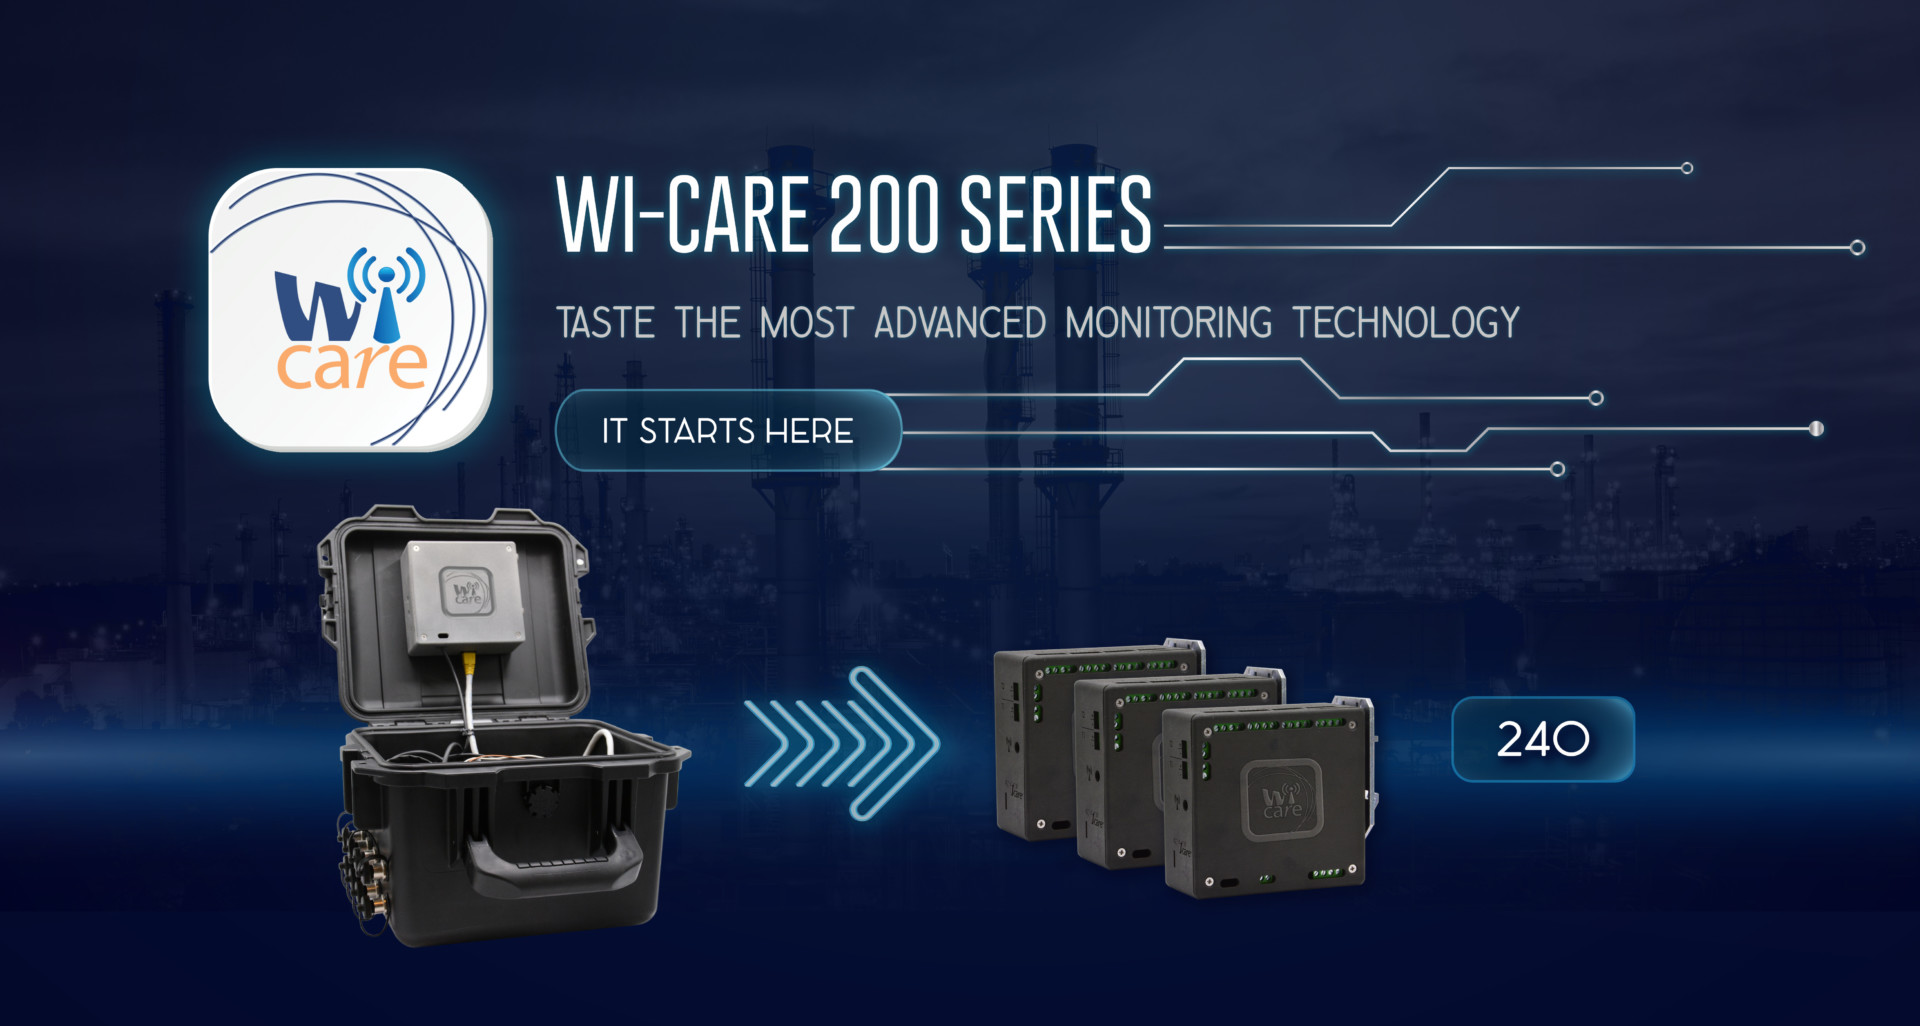 Wi-care-200-series-1-1